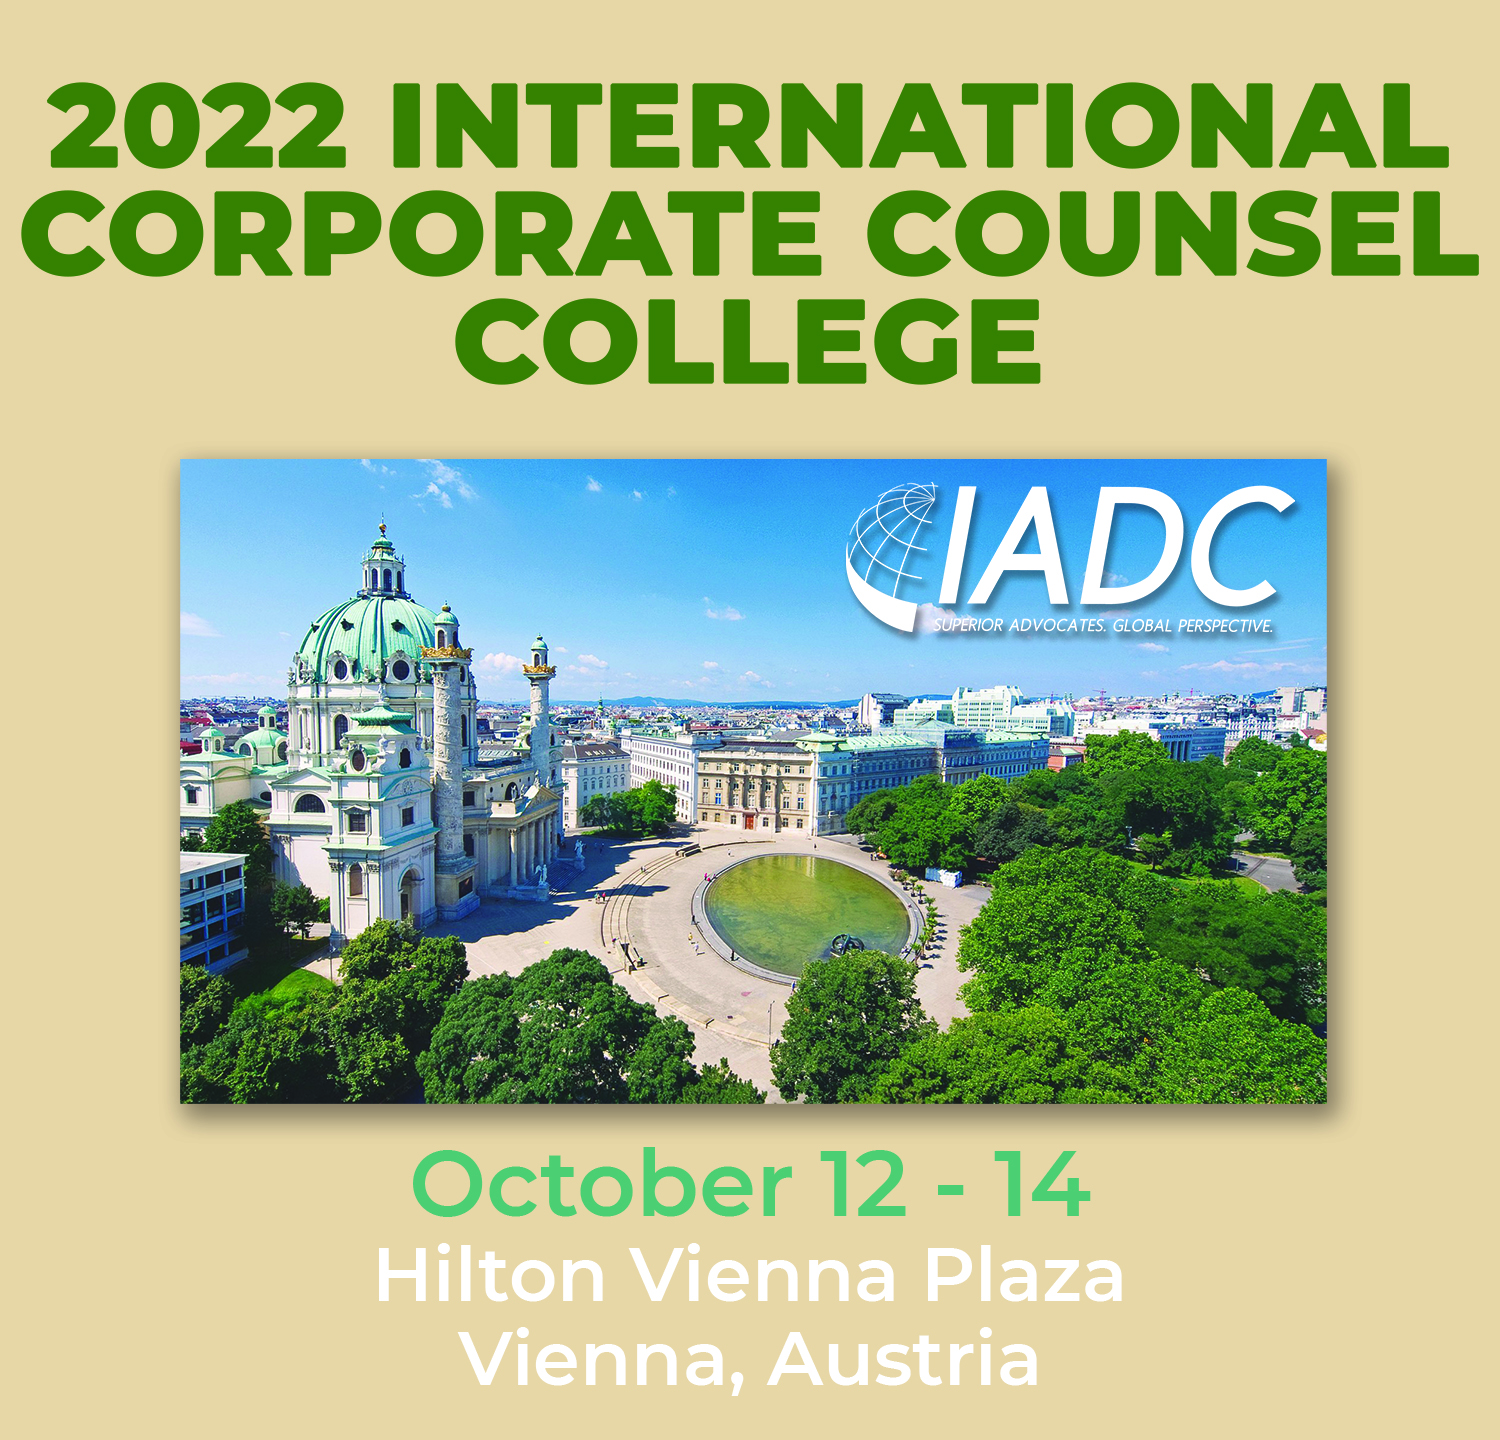 2022 International Corporate Counsel College